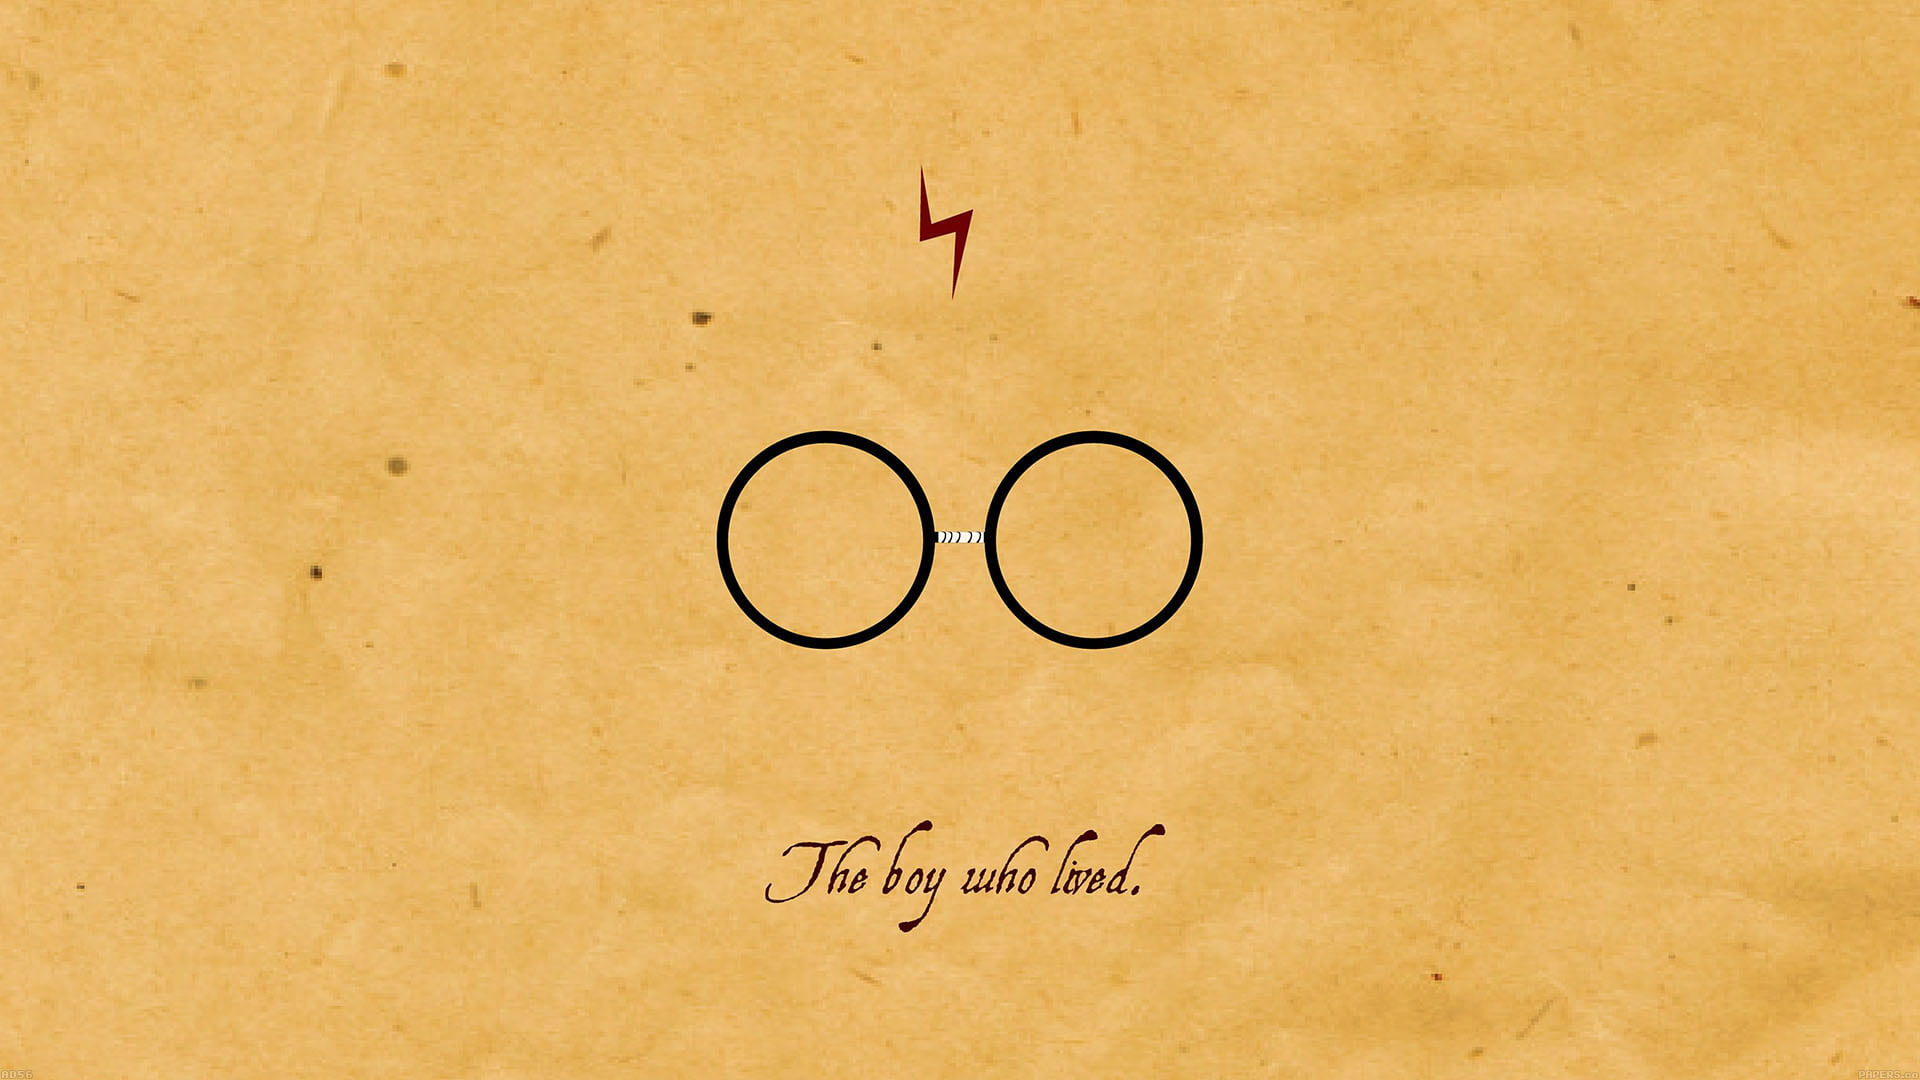 Harry Potter wallpaper and the Sorcerer’s Stone